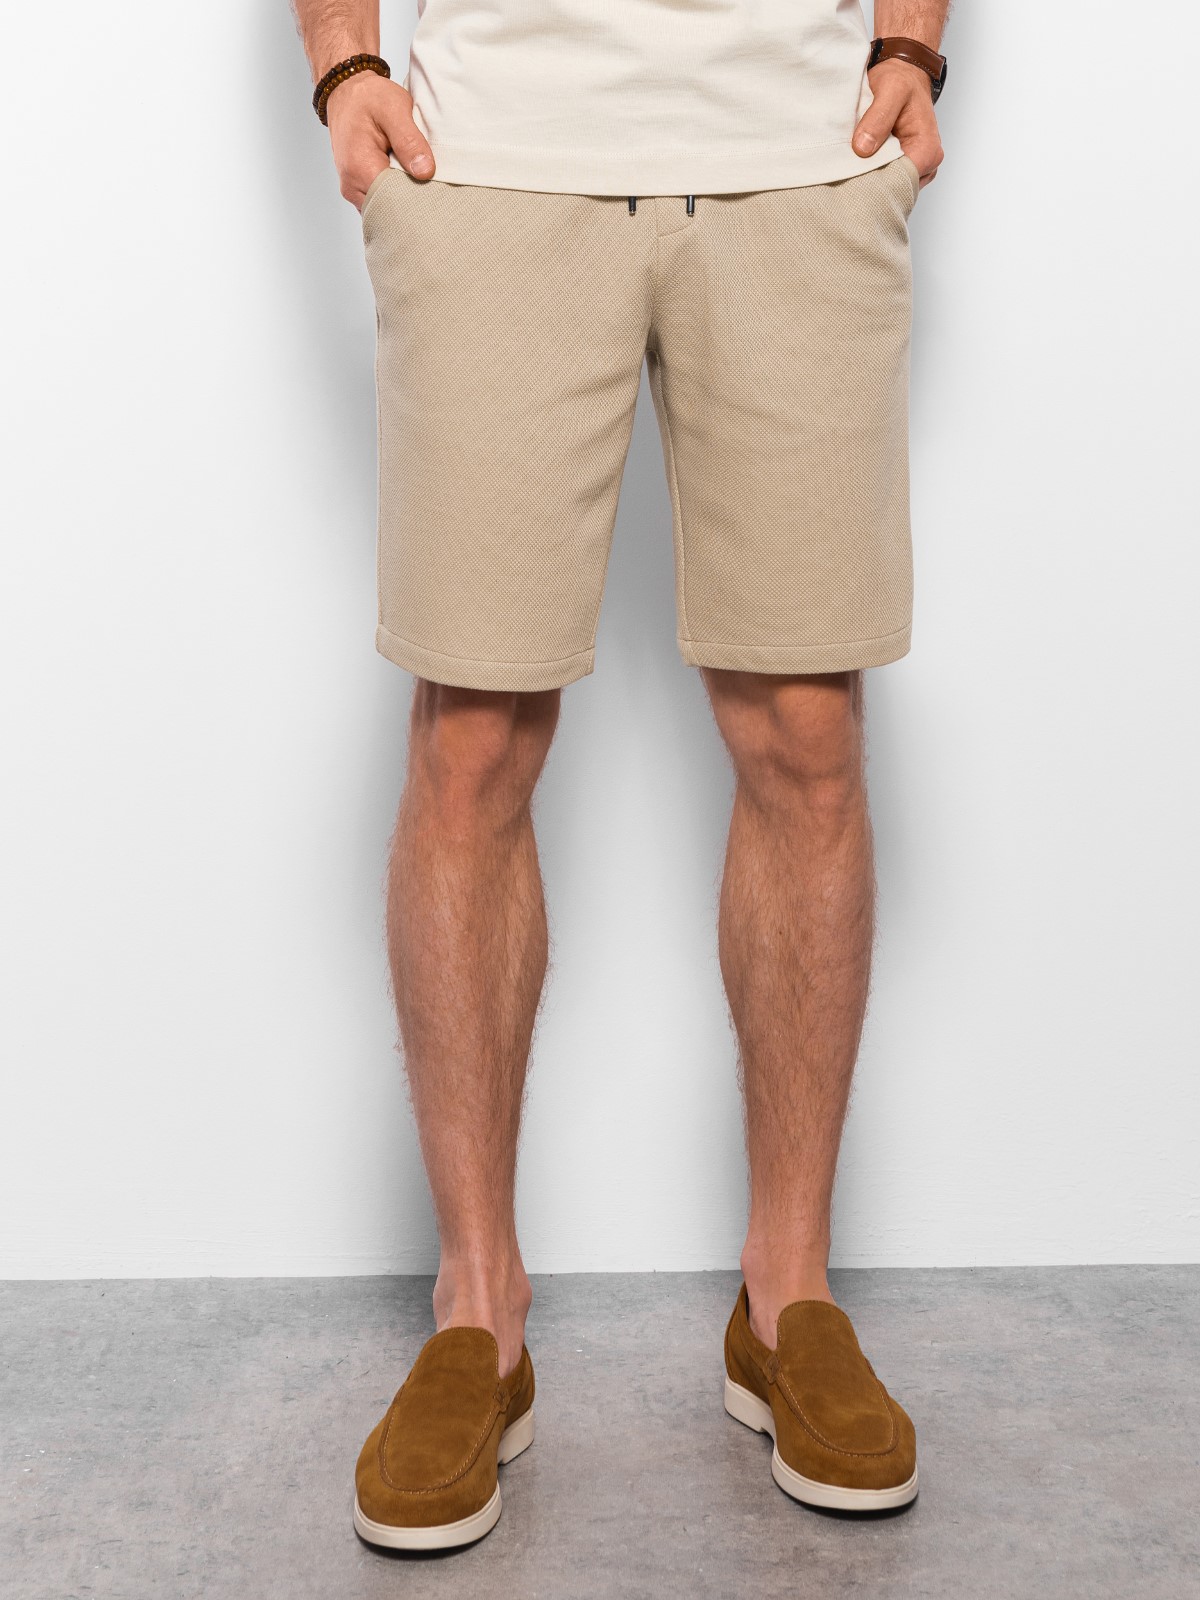 Ombre Men's Knitted Shorts With Decorative Elastic Waistband - Beige